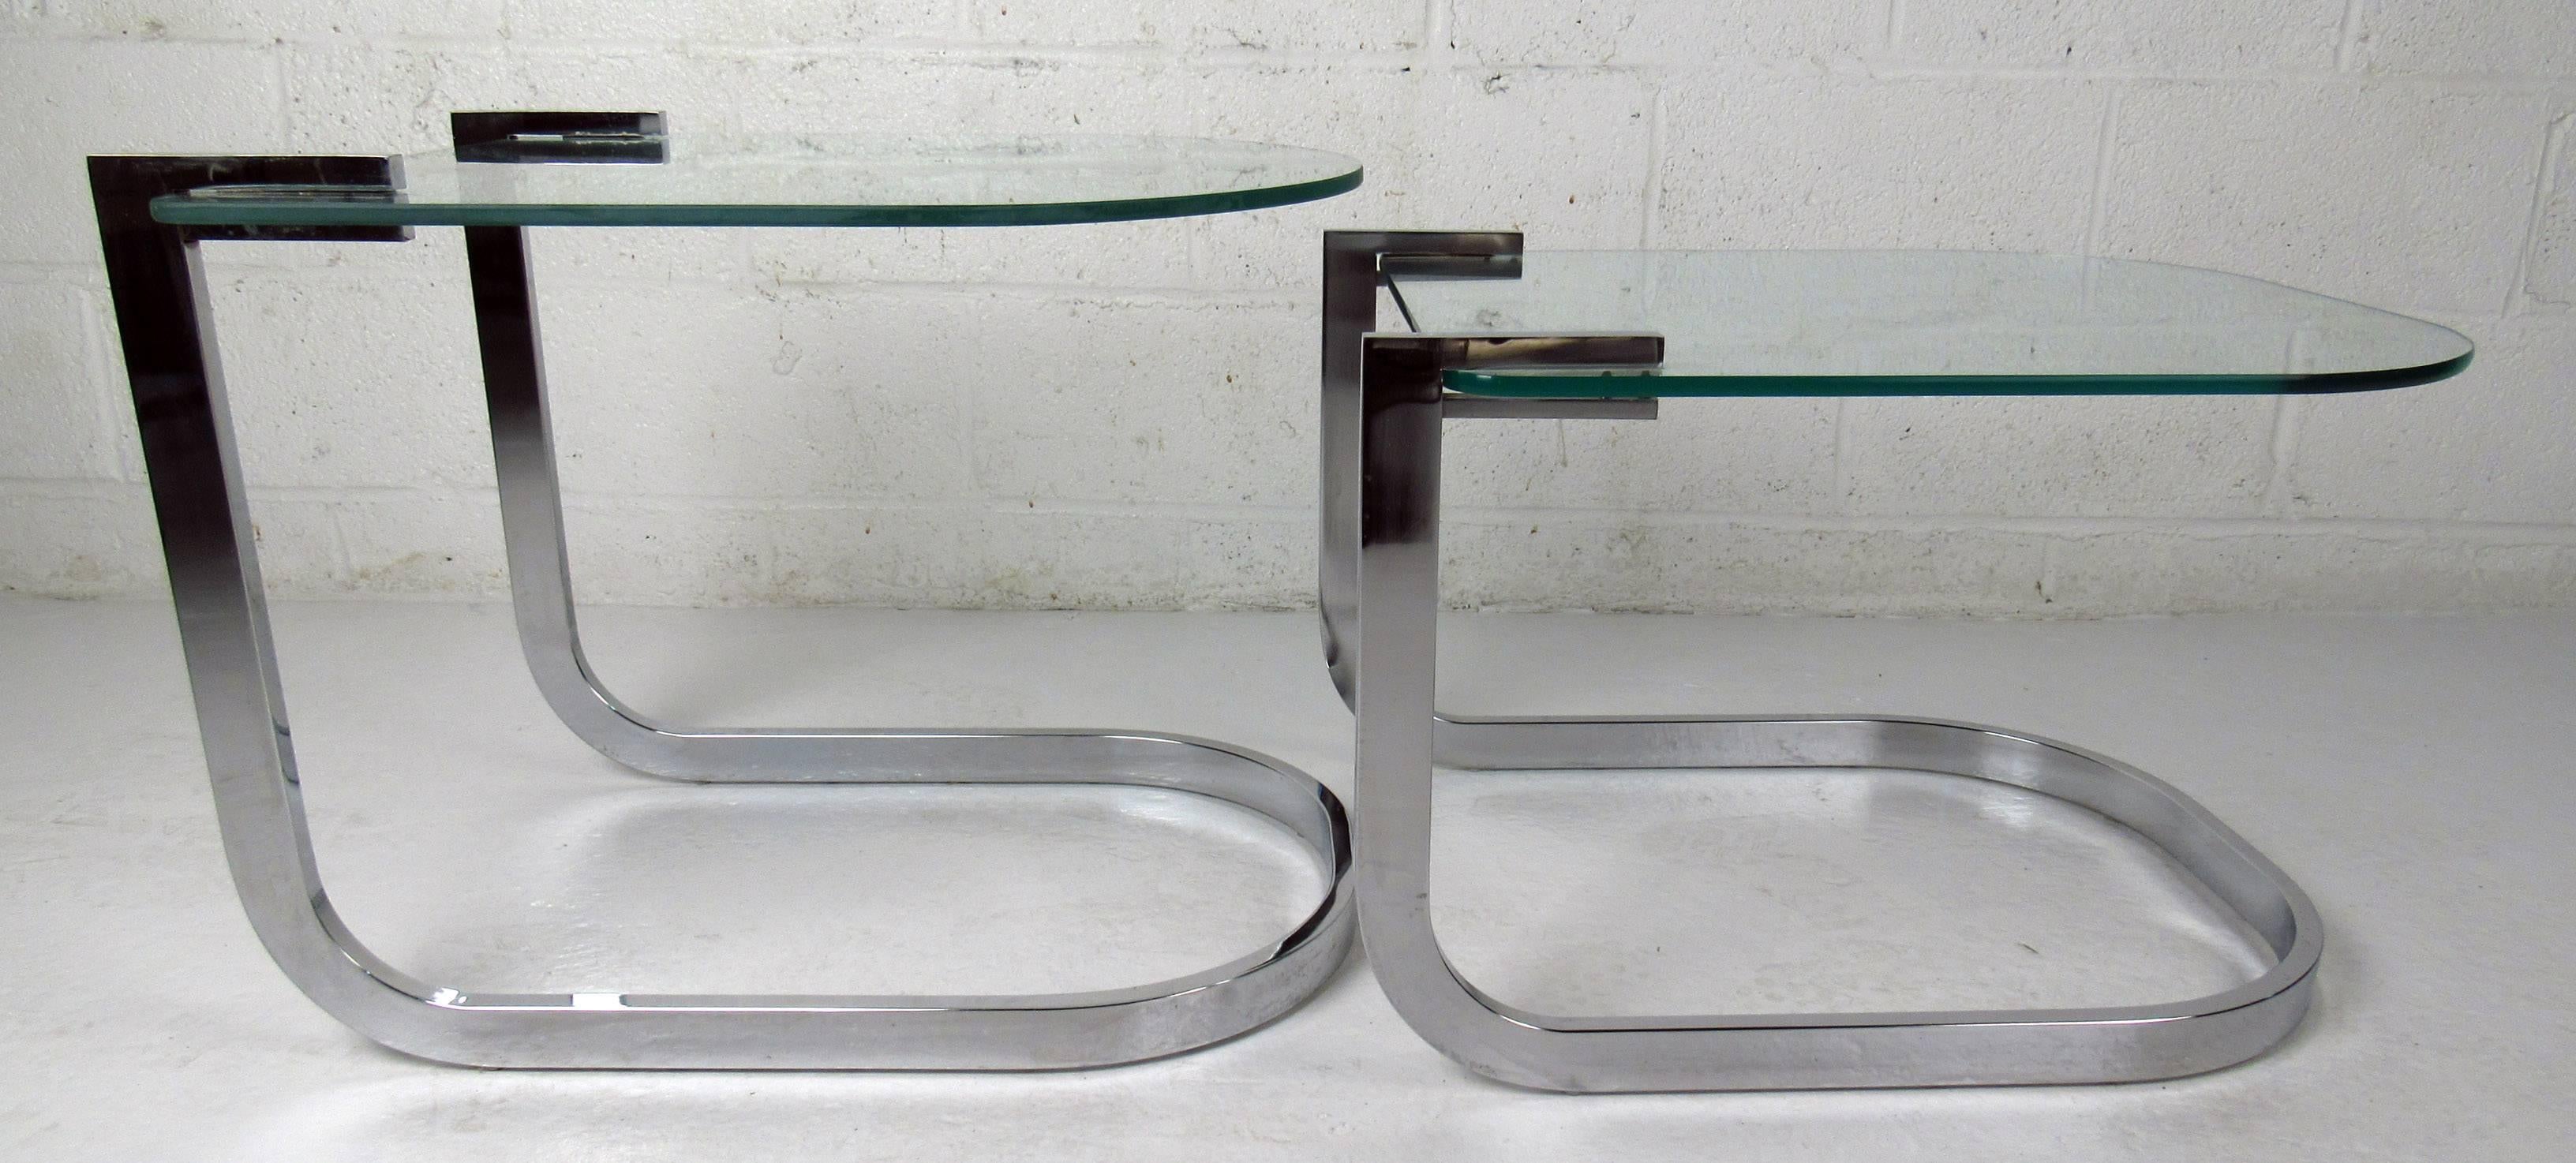 Set of Midcentury Chrome and Glass Nesting Tables by DIA For Sale 1